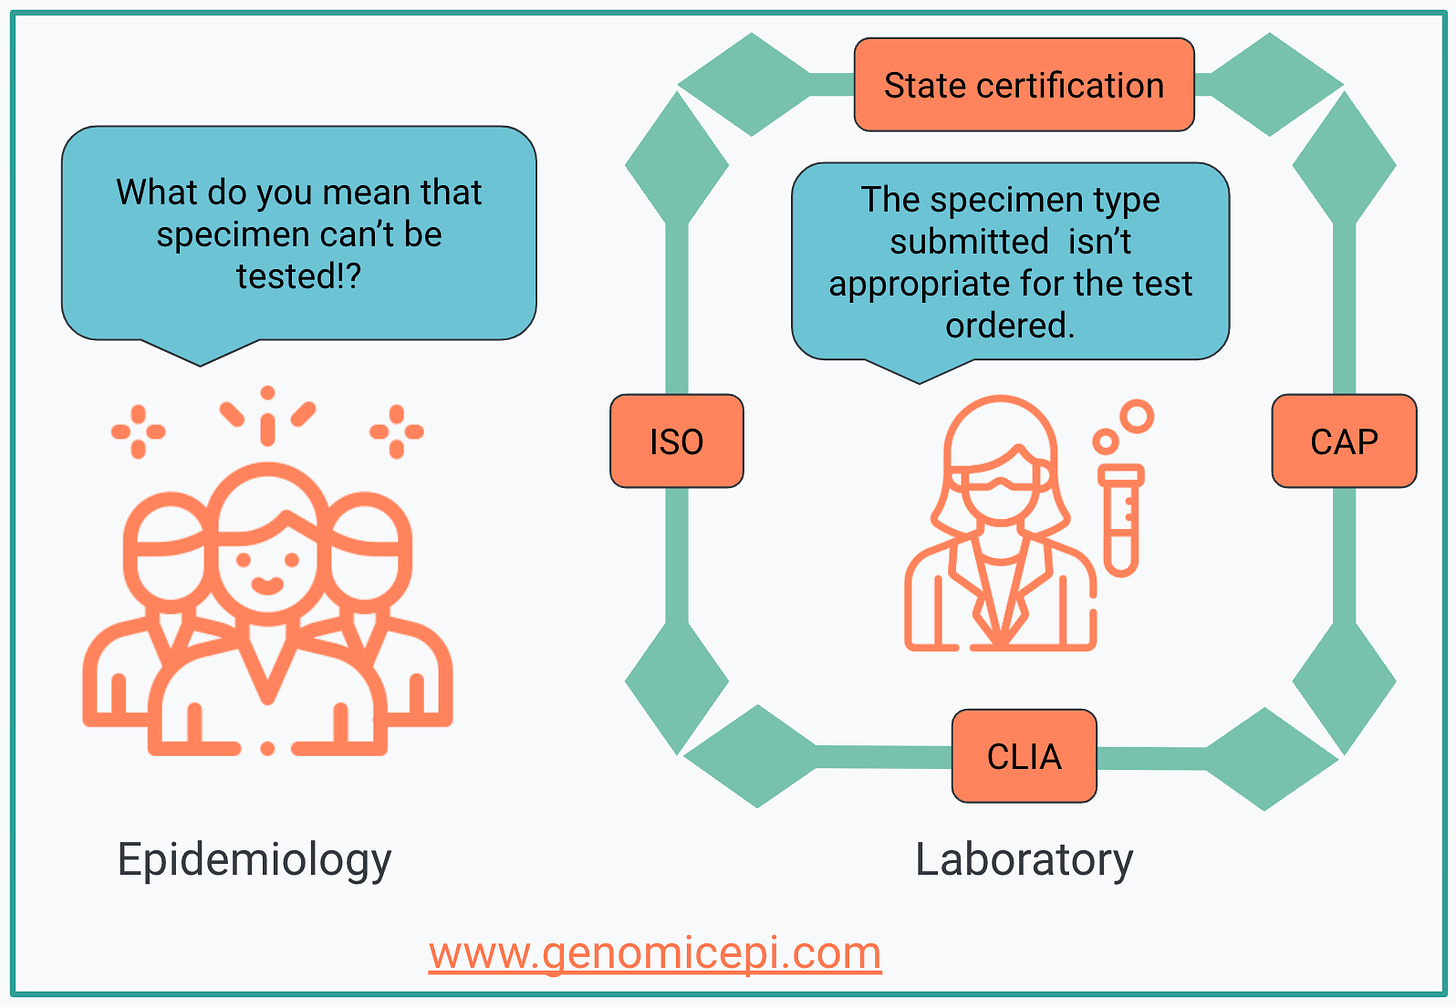 Image showing a group of epidemiologists saying "What do you mean that specimen can't be tested" and a laboratorian saying "The specimen submitted isn't appropriate for the test ordered"